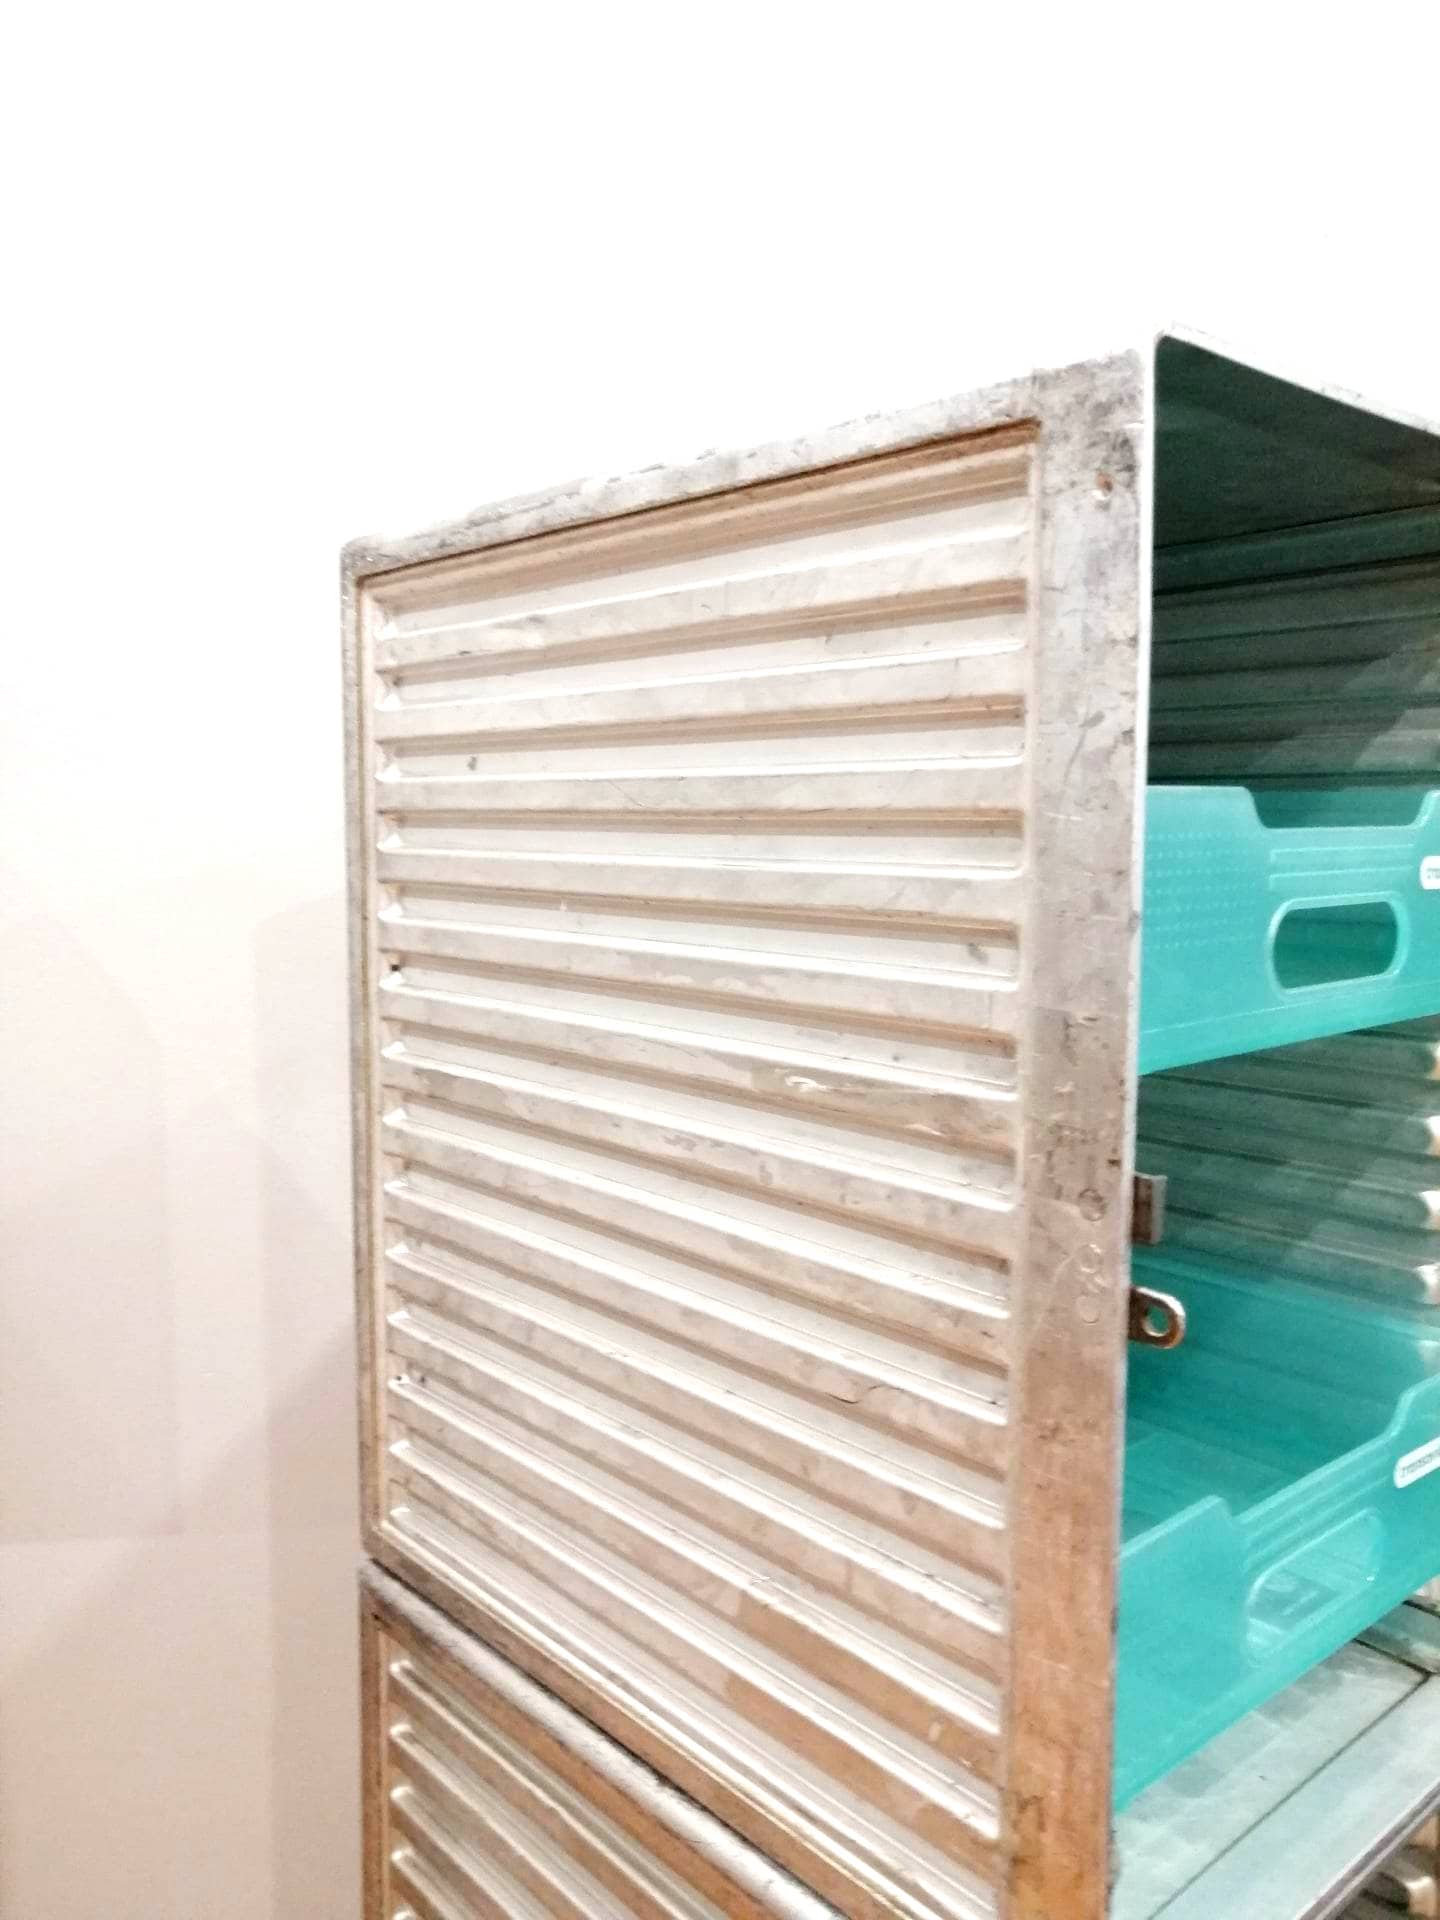 Aviation Storage Double Cabinet, Industrial Aircraft Cabinet Made of Original Transavia Airline Galley Storage Containers